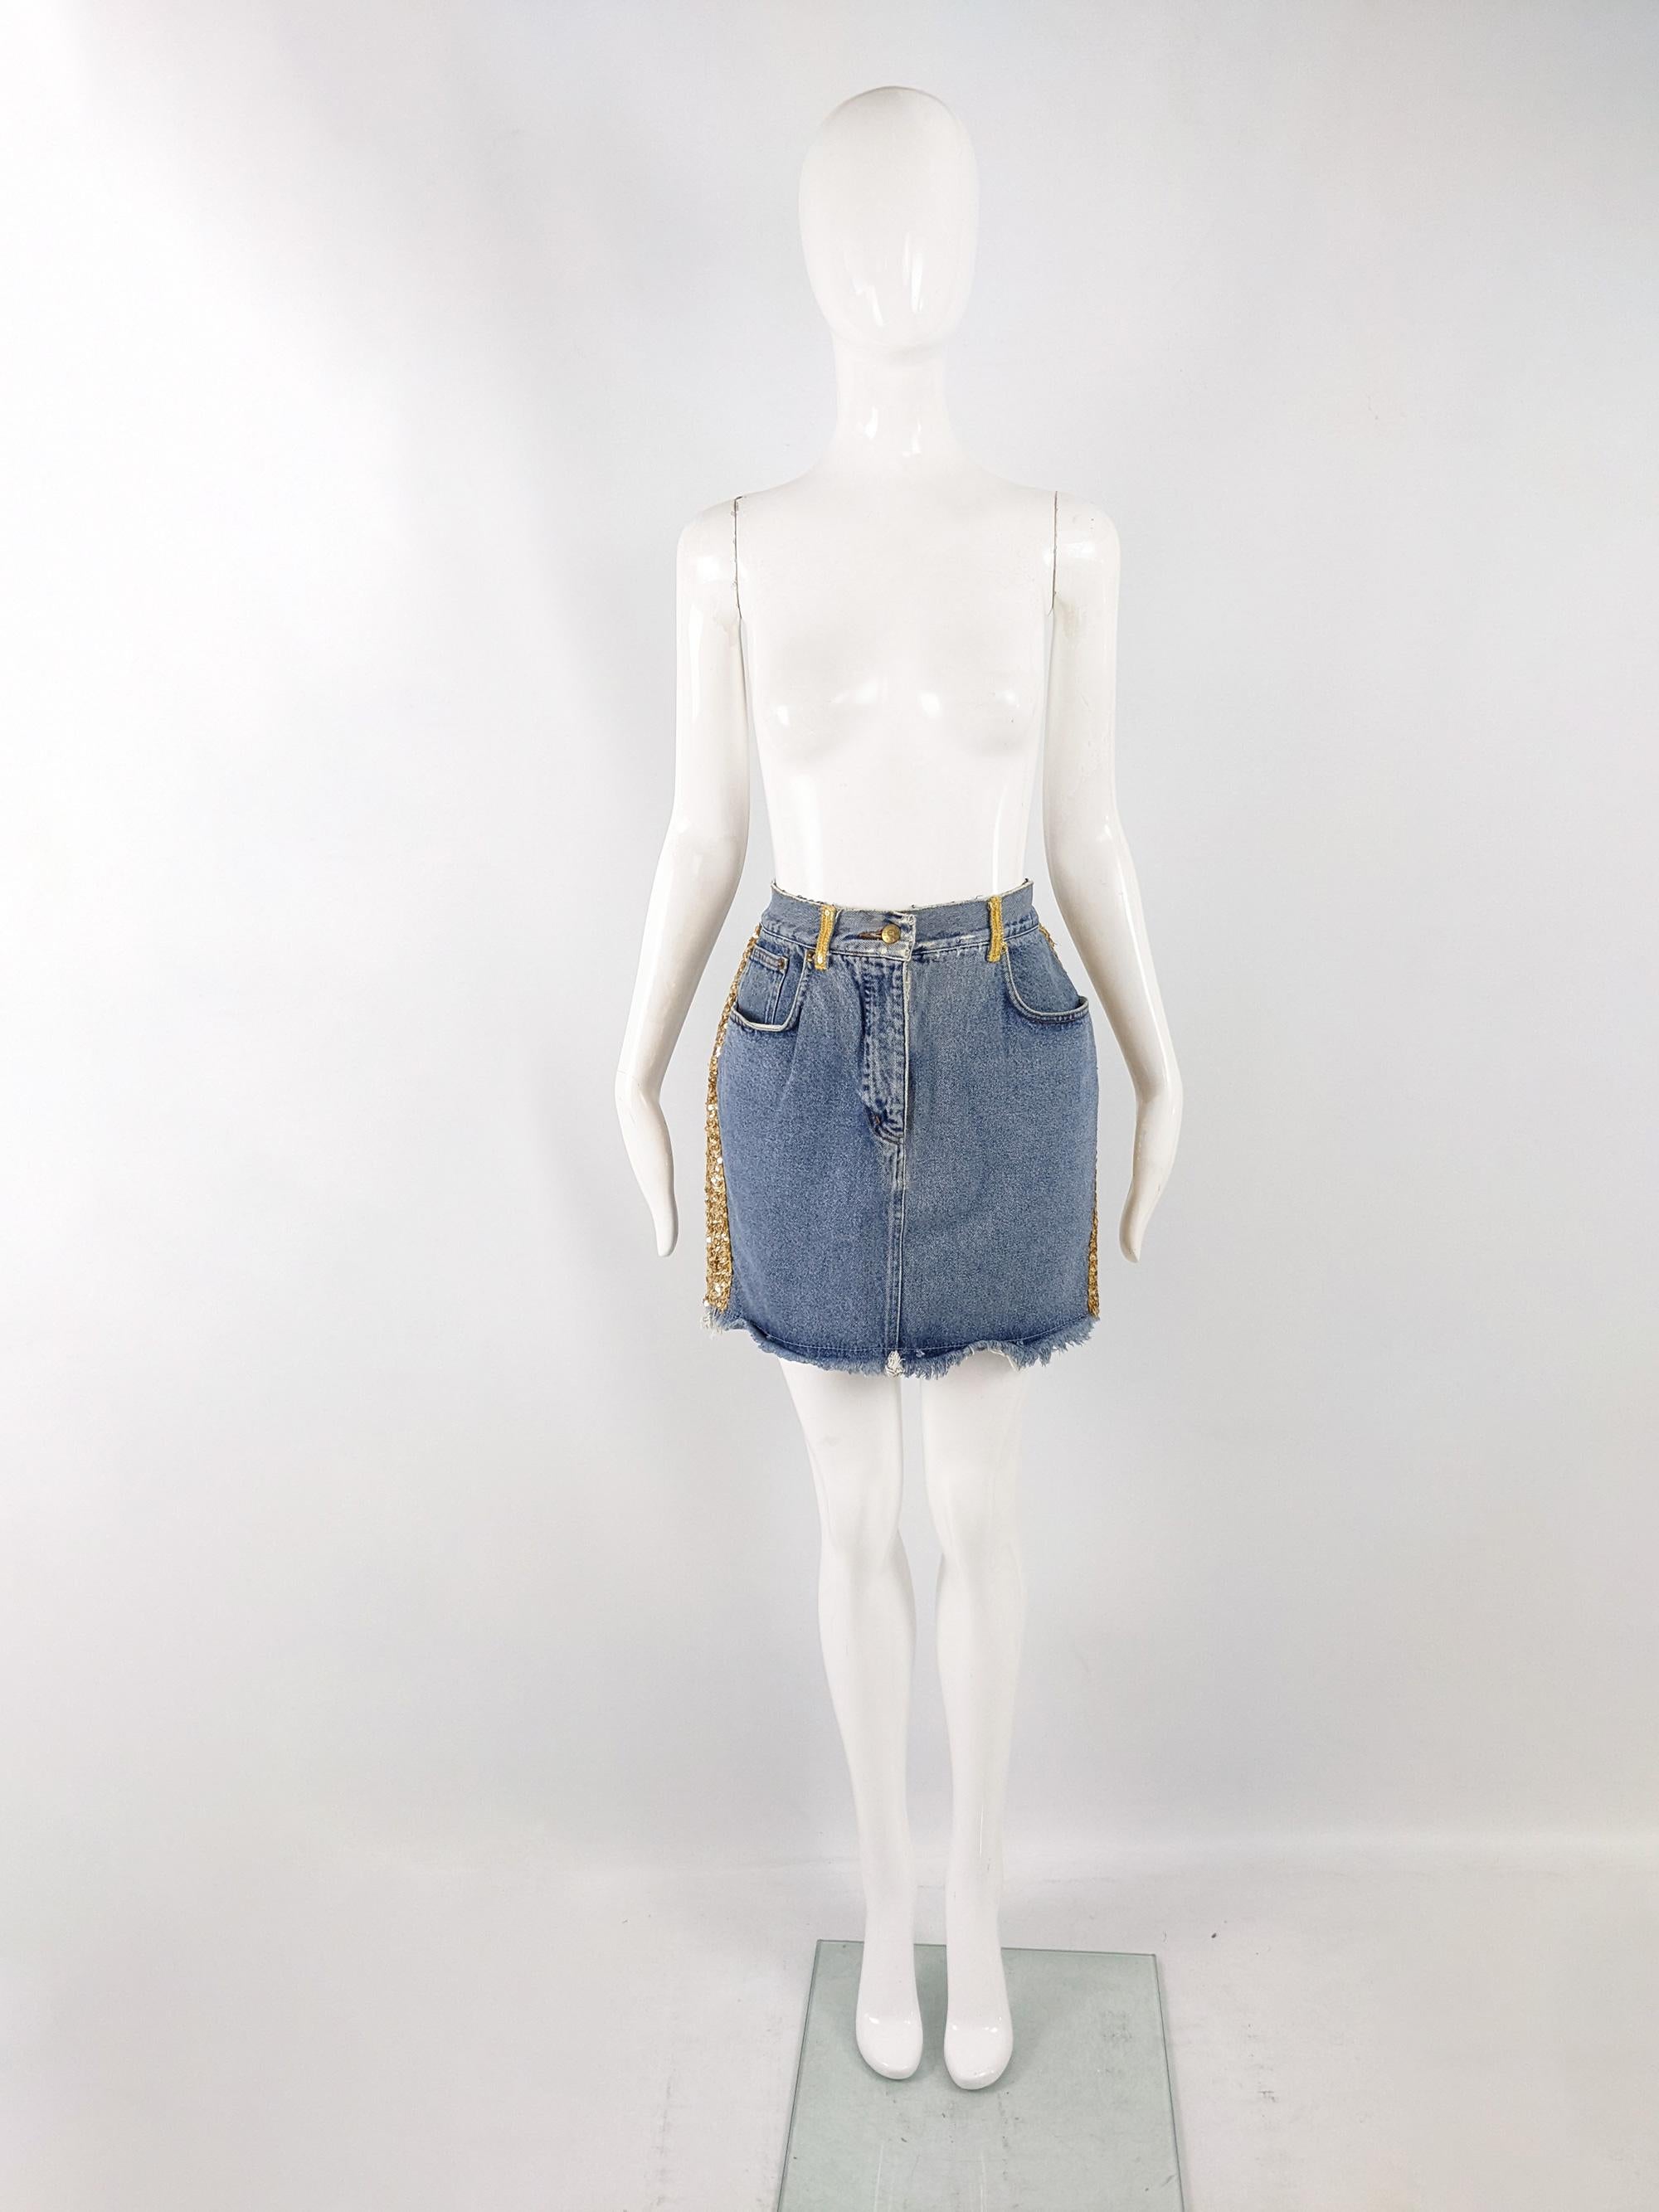 An incredible and rare vintage mini skirt from the late 80s/ early 90s by iconic British fashion designer, Katharine Hamnett. In a blue denim with a frayed hem and gold sequin trim to the side and belt loops, giving a glam rock look.

Size: Marked